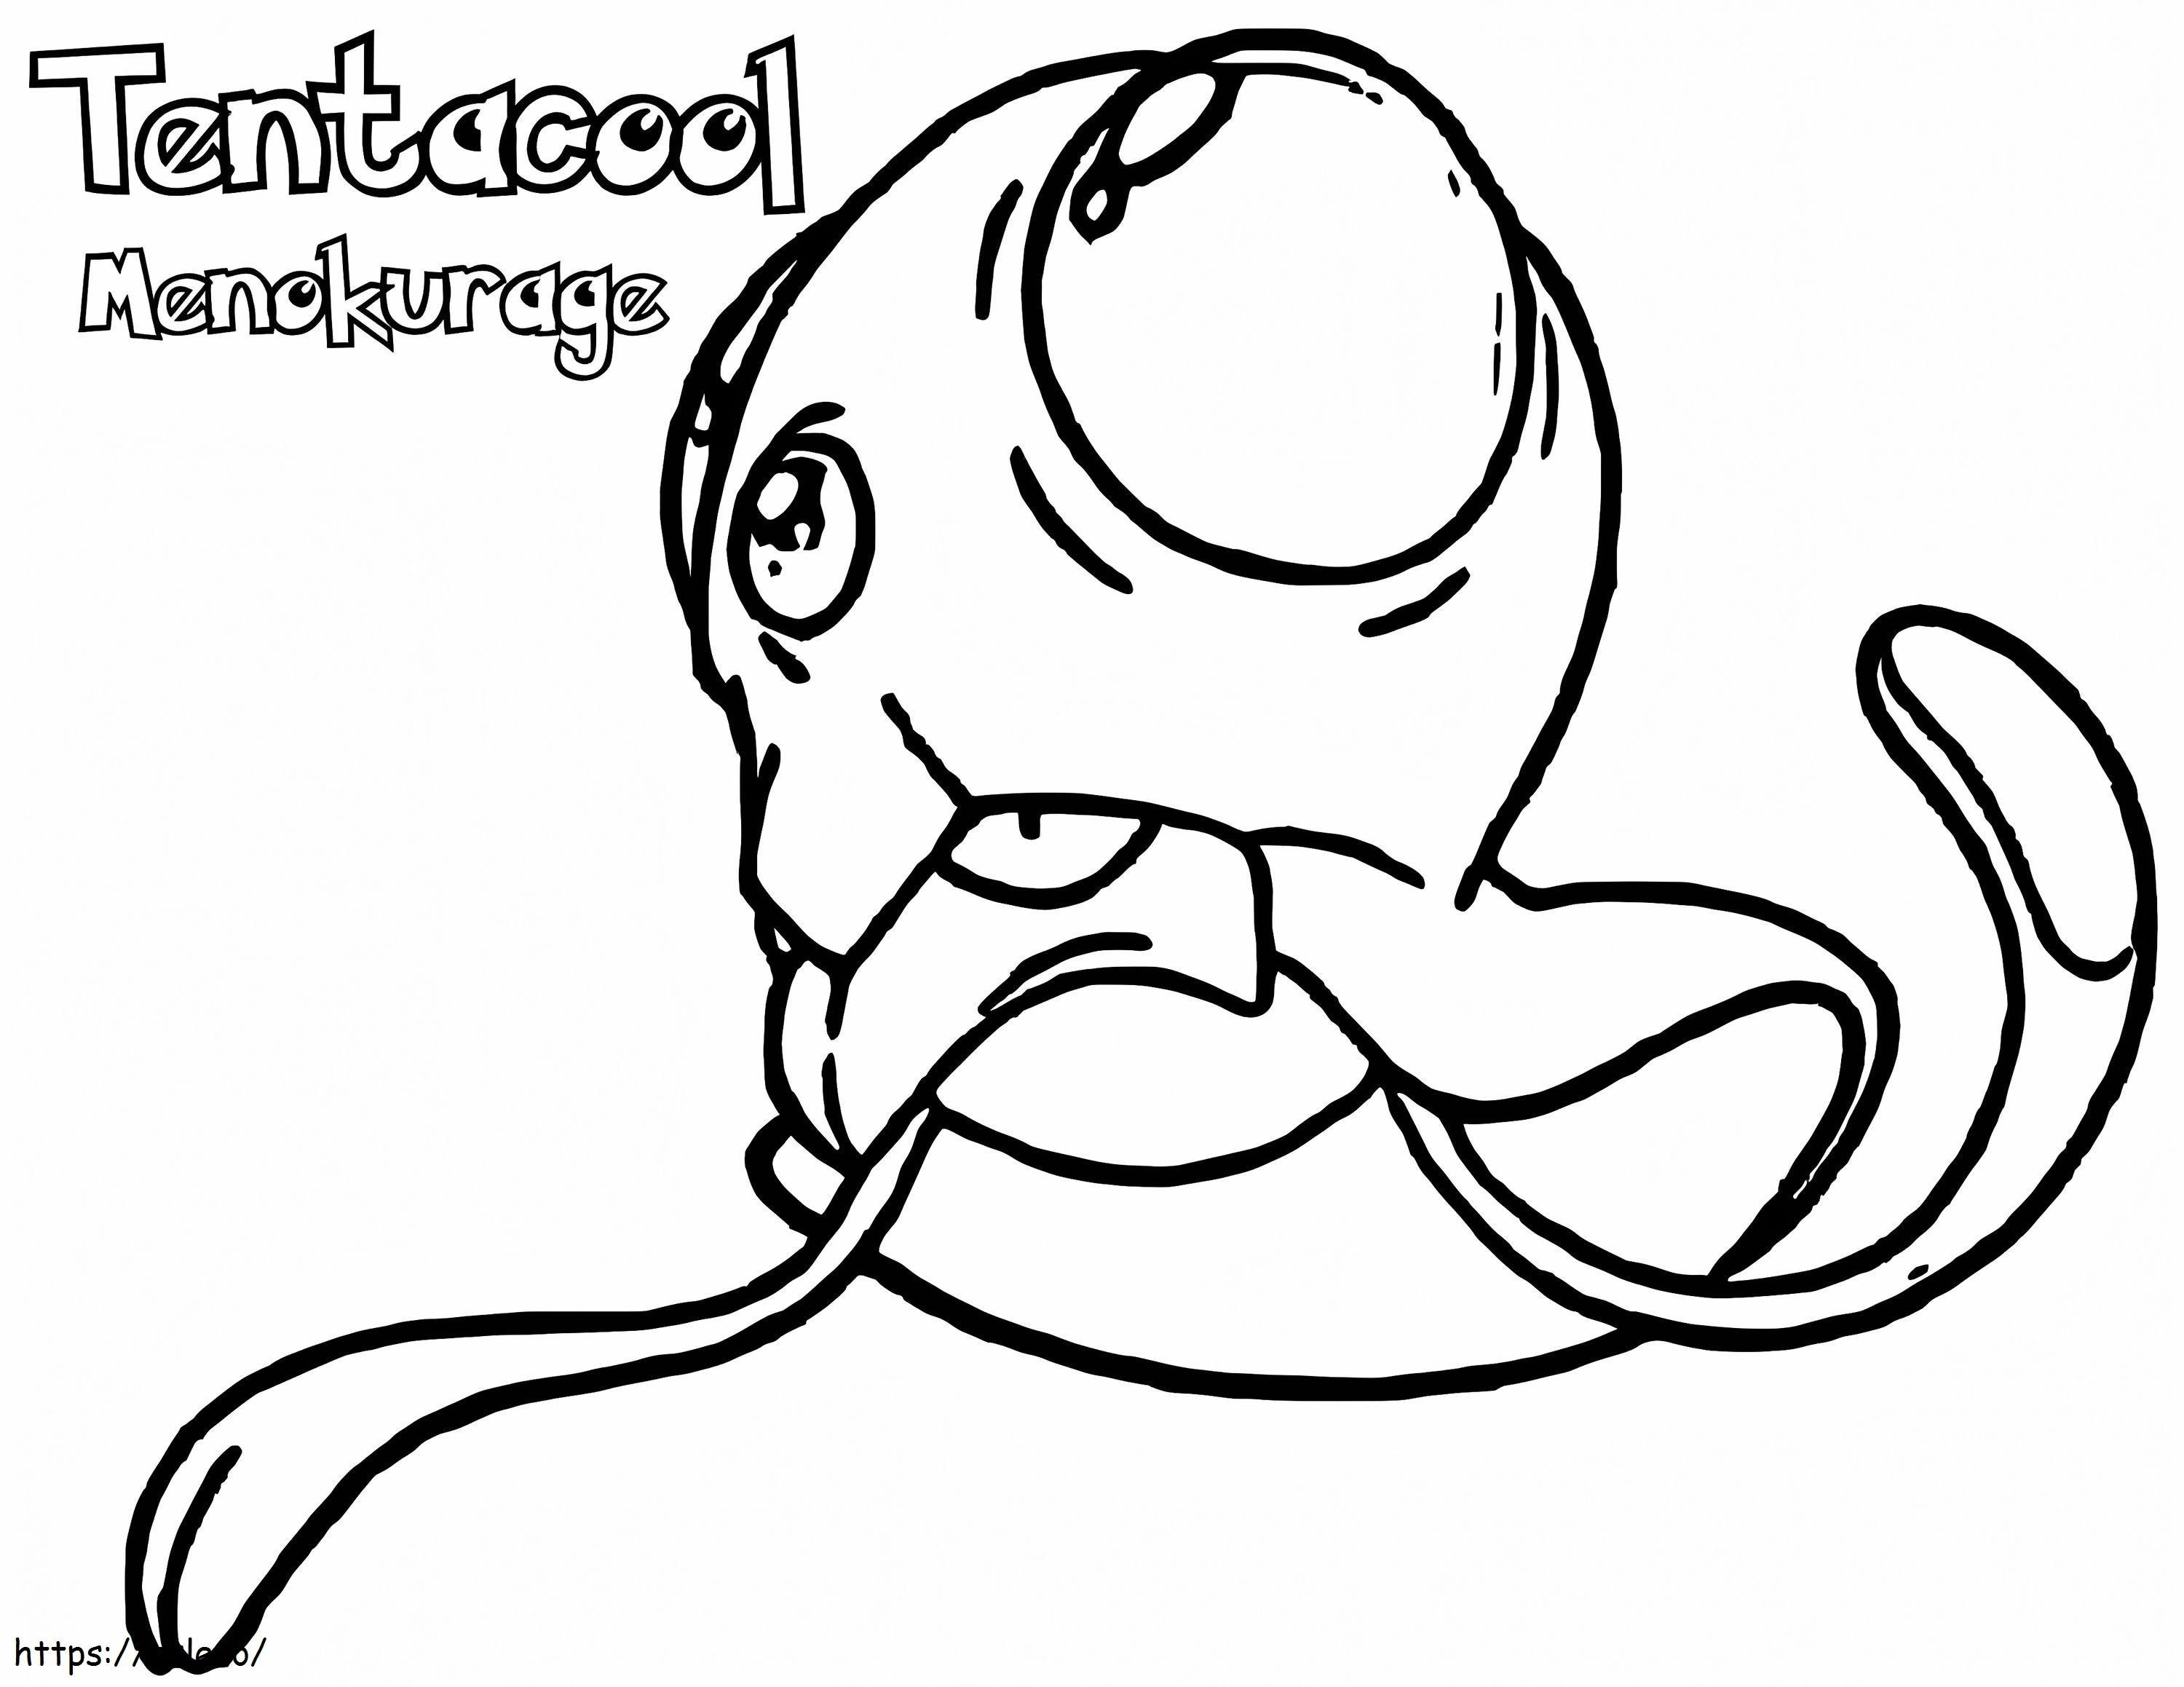 Tentacool 5 coloring page